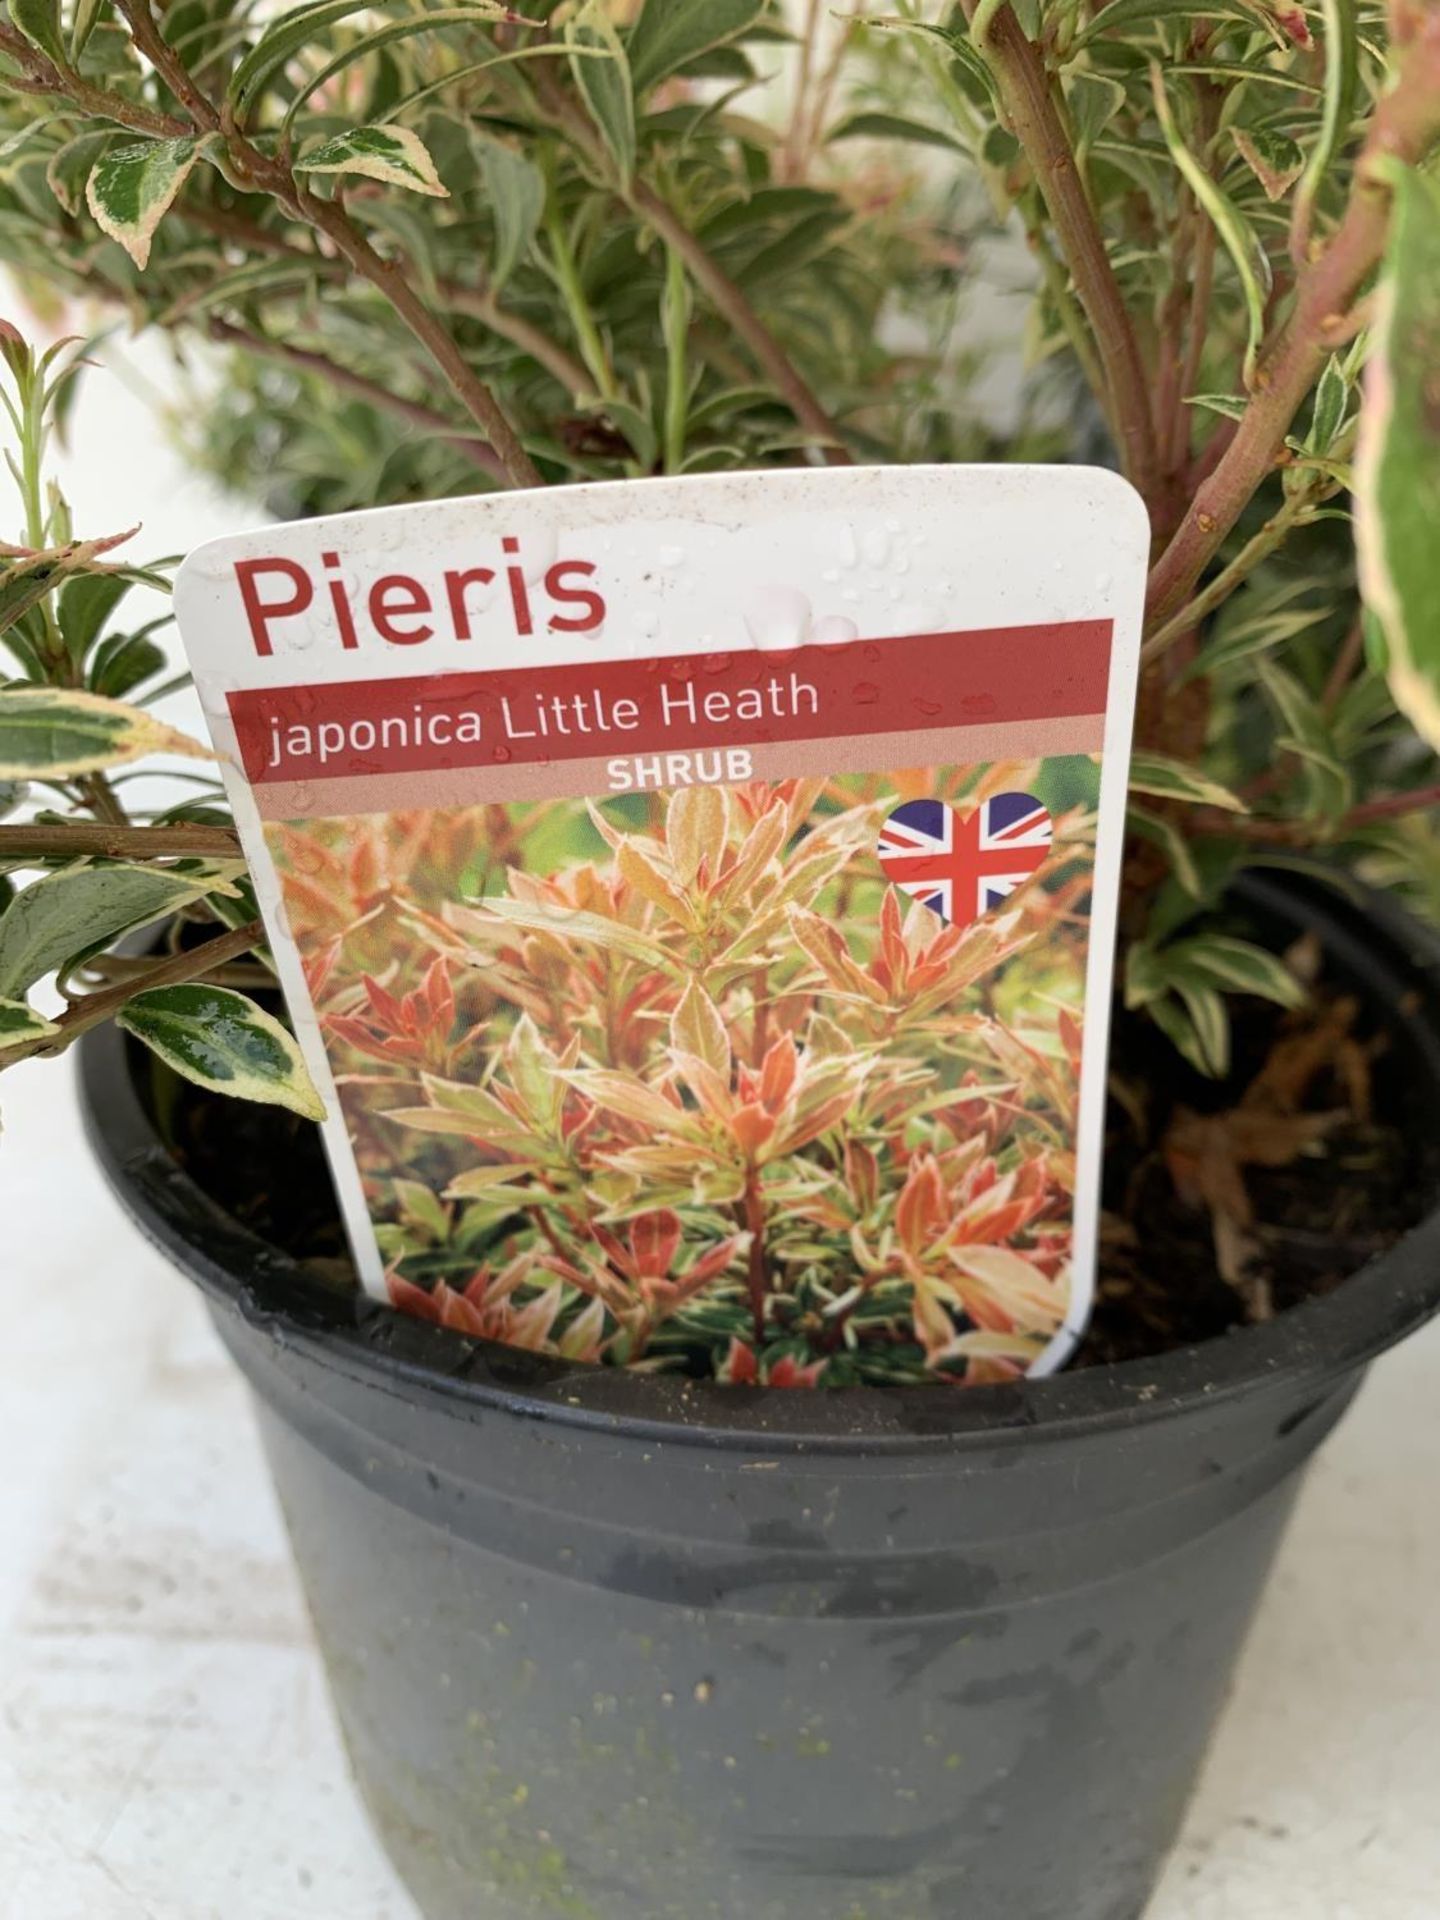 SEVEN PIERIS LITTLE HEATH 45CM TALL IN 2 LTR POTS TO BE SOLD FOR THE SEVEN PLUS VAT - Image 13 of 13